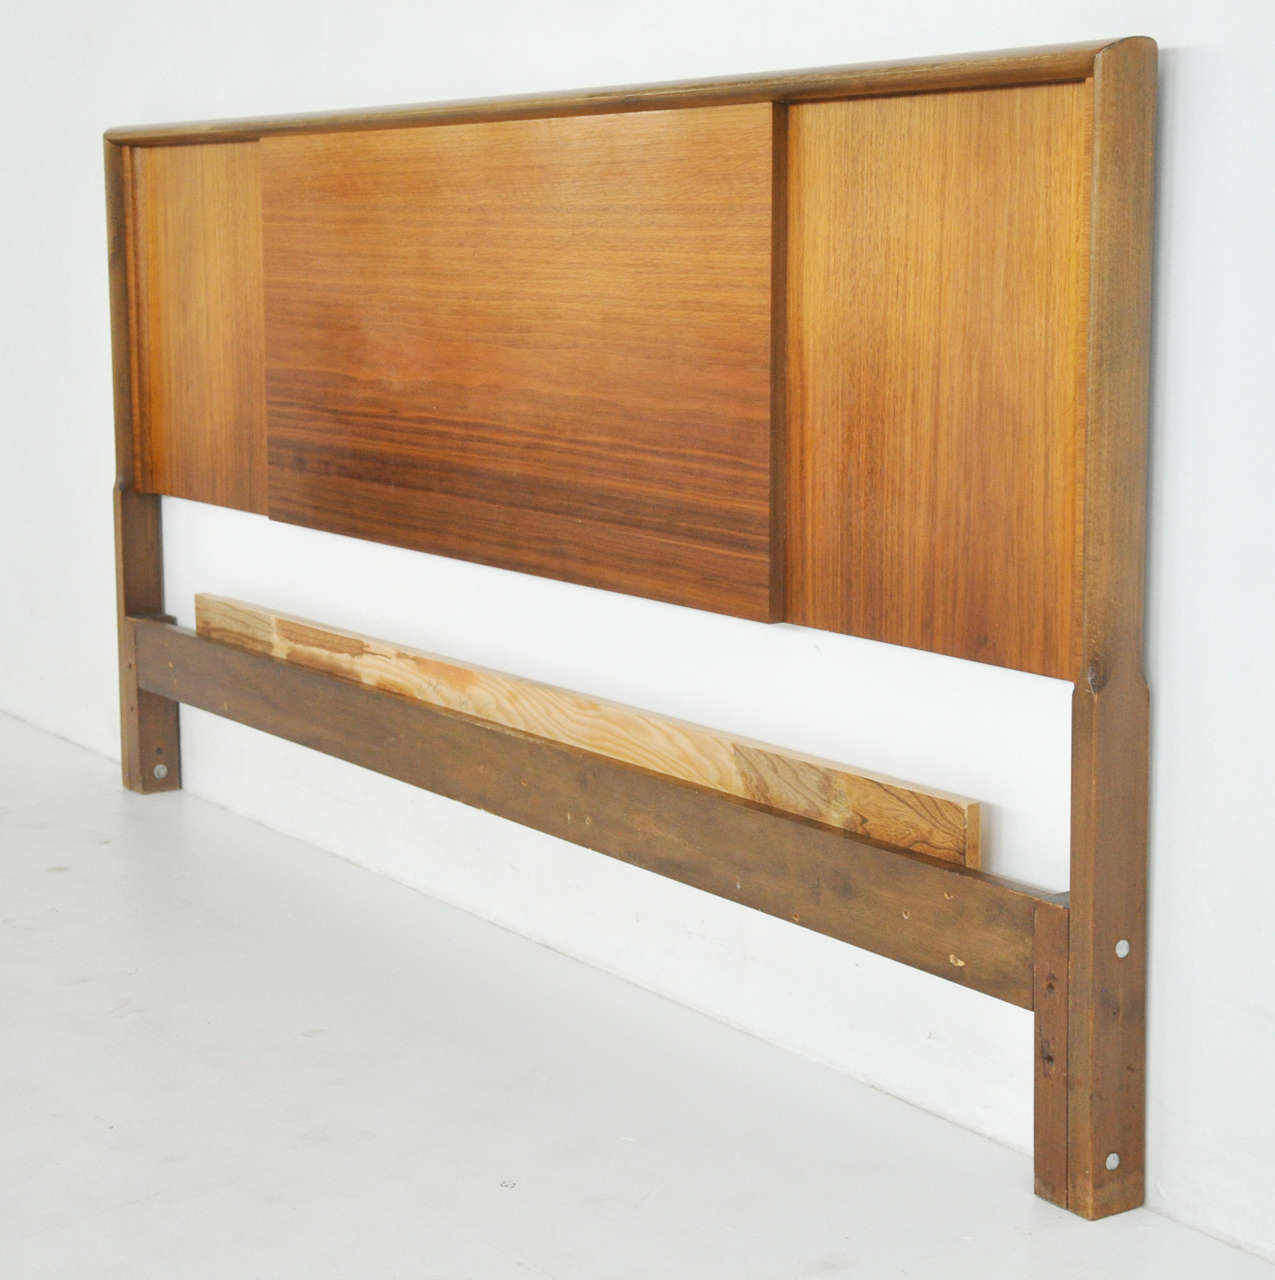 King-size headboard by Edmond Spence. Made in Sweden.

Other times from this set are available.